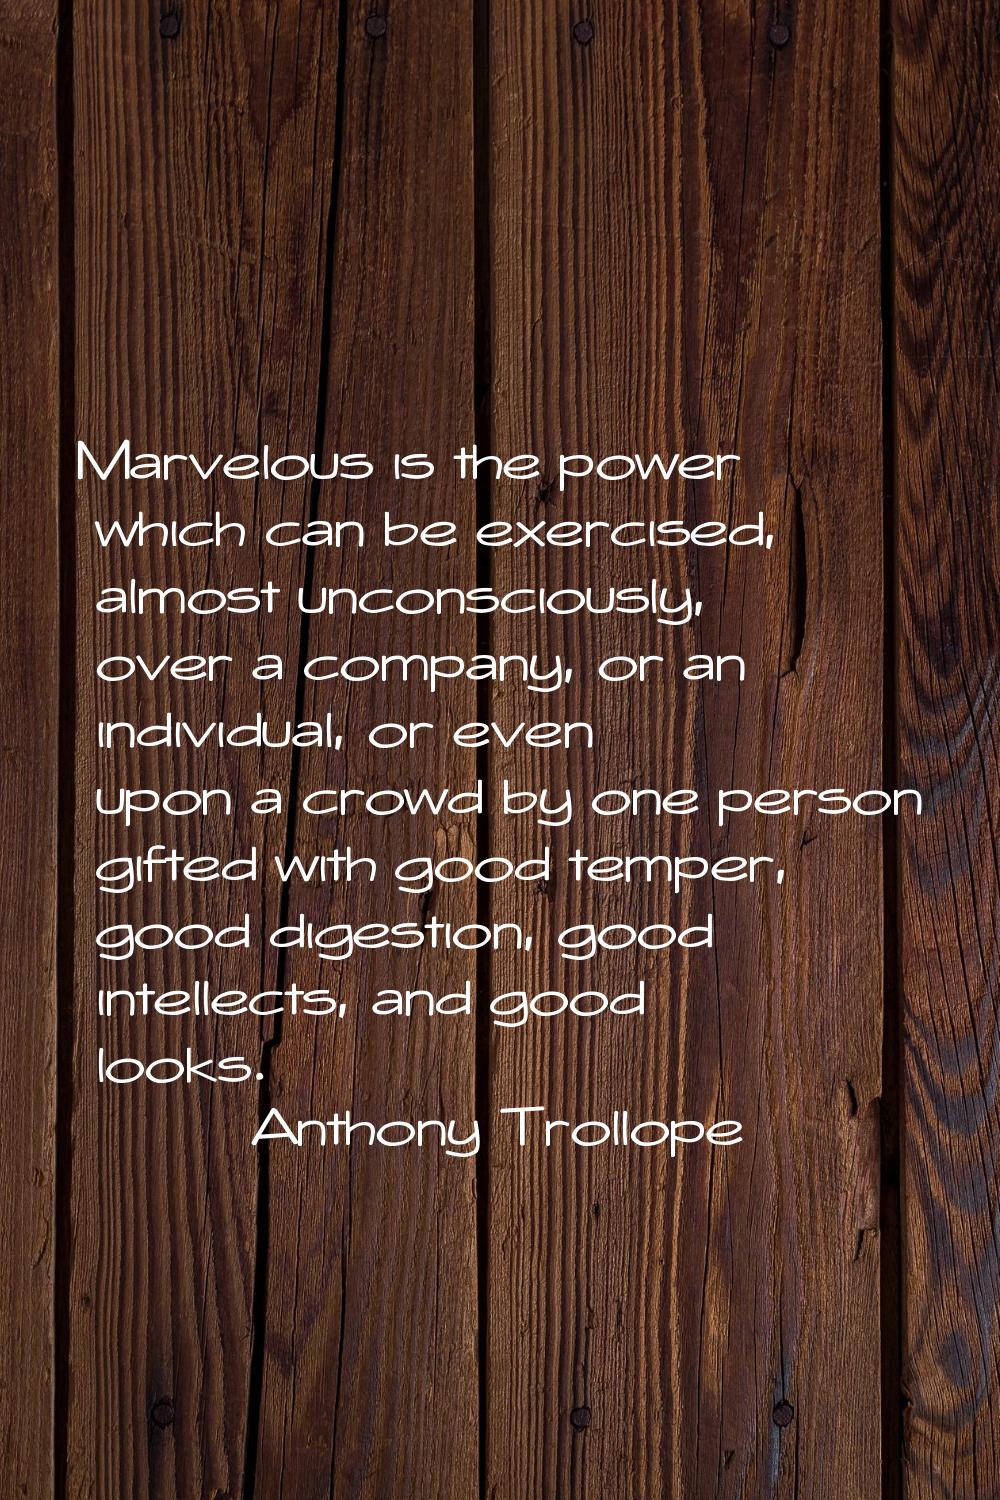 Marvelous is the power which can be exercised, almost unconsciously, over a company, or an individu